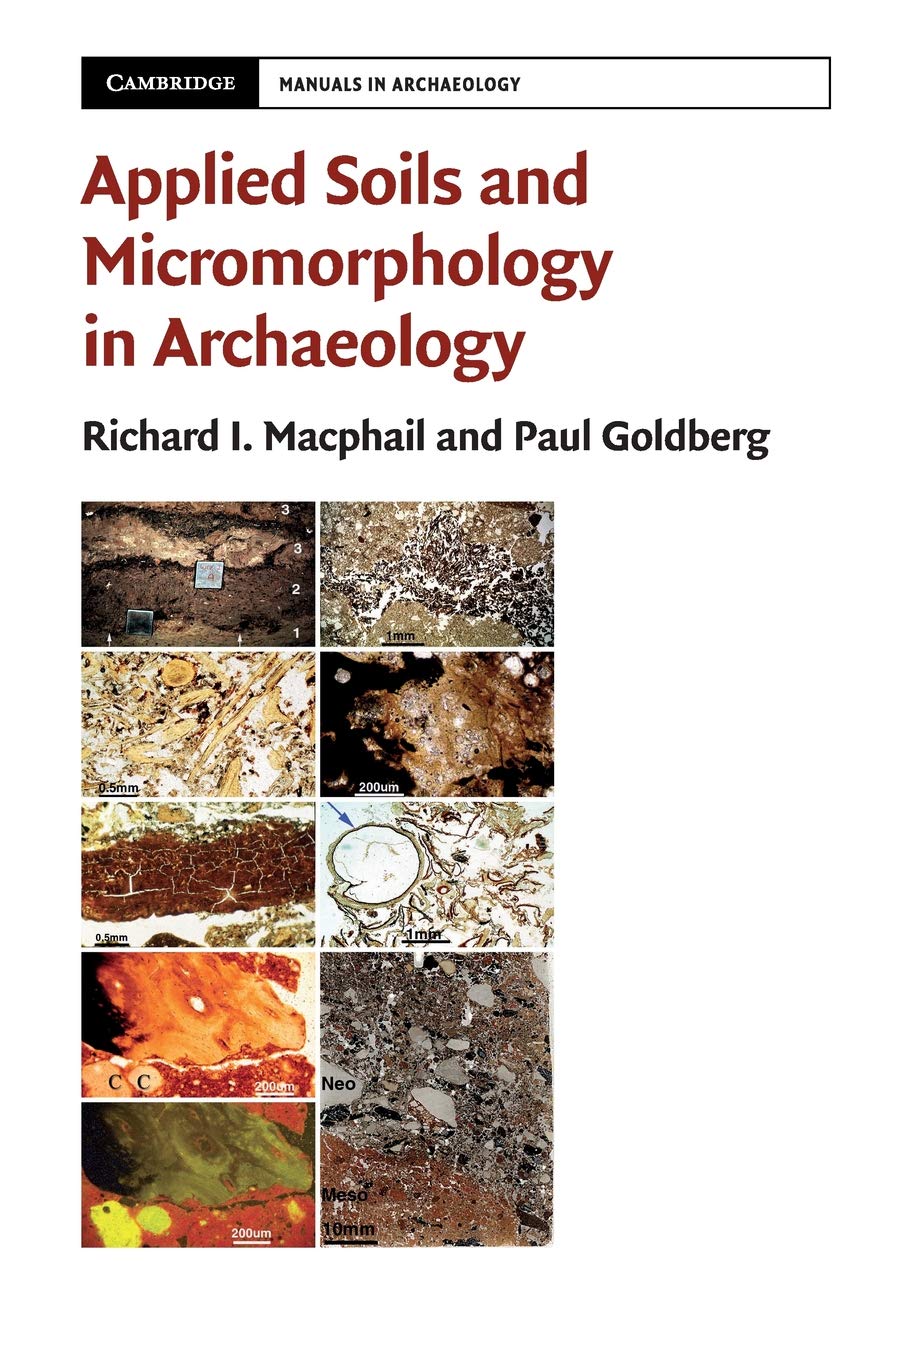 Applied Soils and Micromorphology in Archaeology, 2018, 630 p.